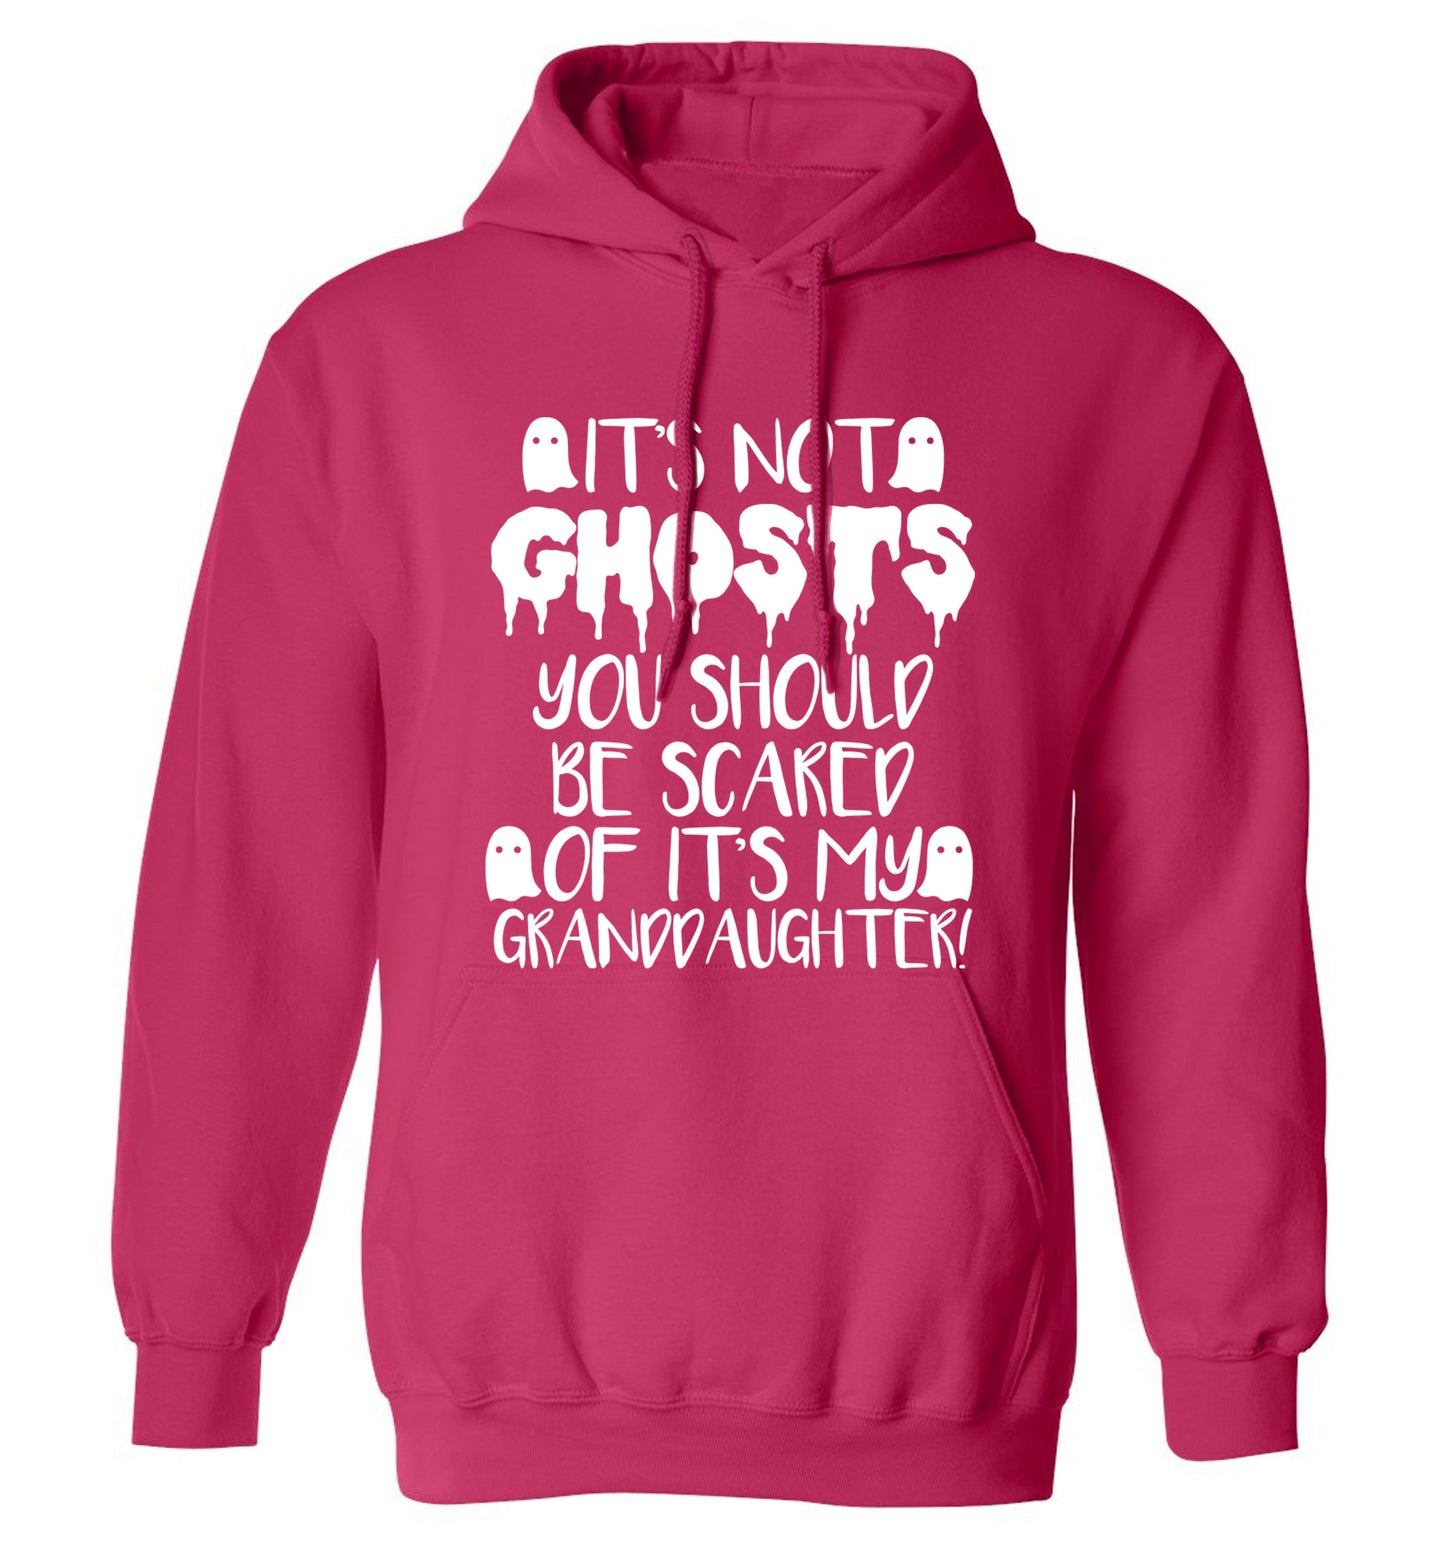 It's not ghosts you should be scared of it's my granddaughter! adults unisex pink hoodie 2XL